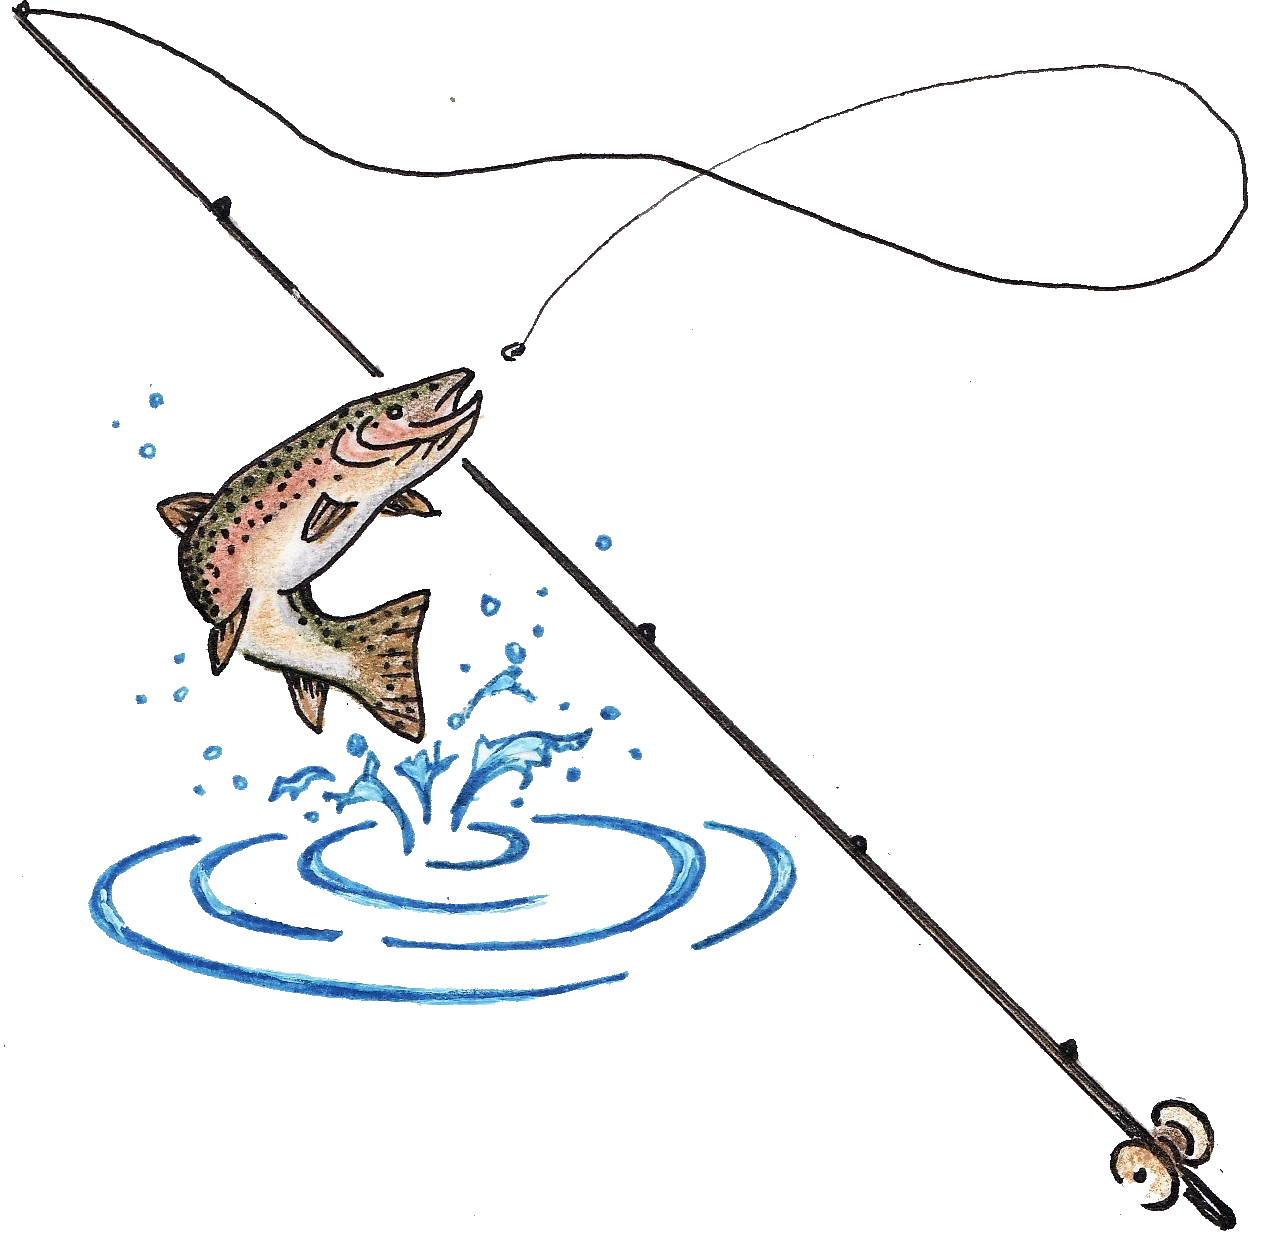 Fishing pole 0 images about fishing lures and rods on clipart